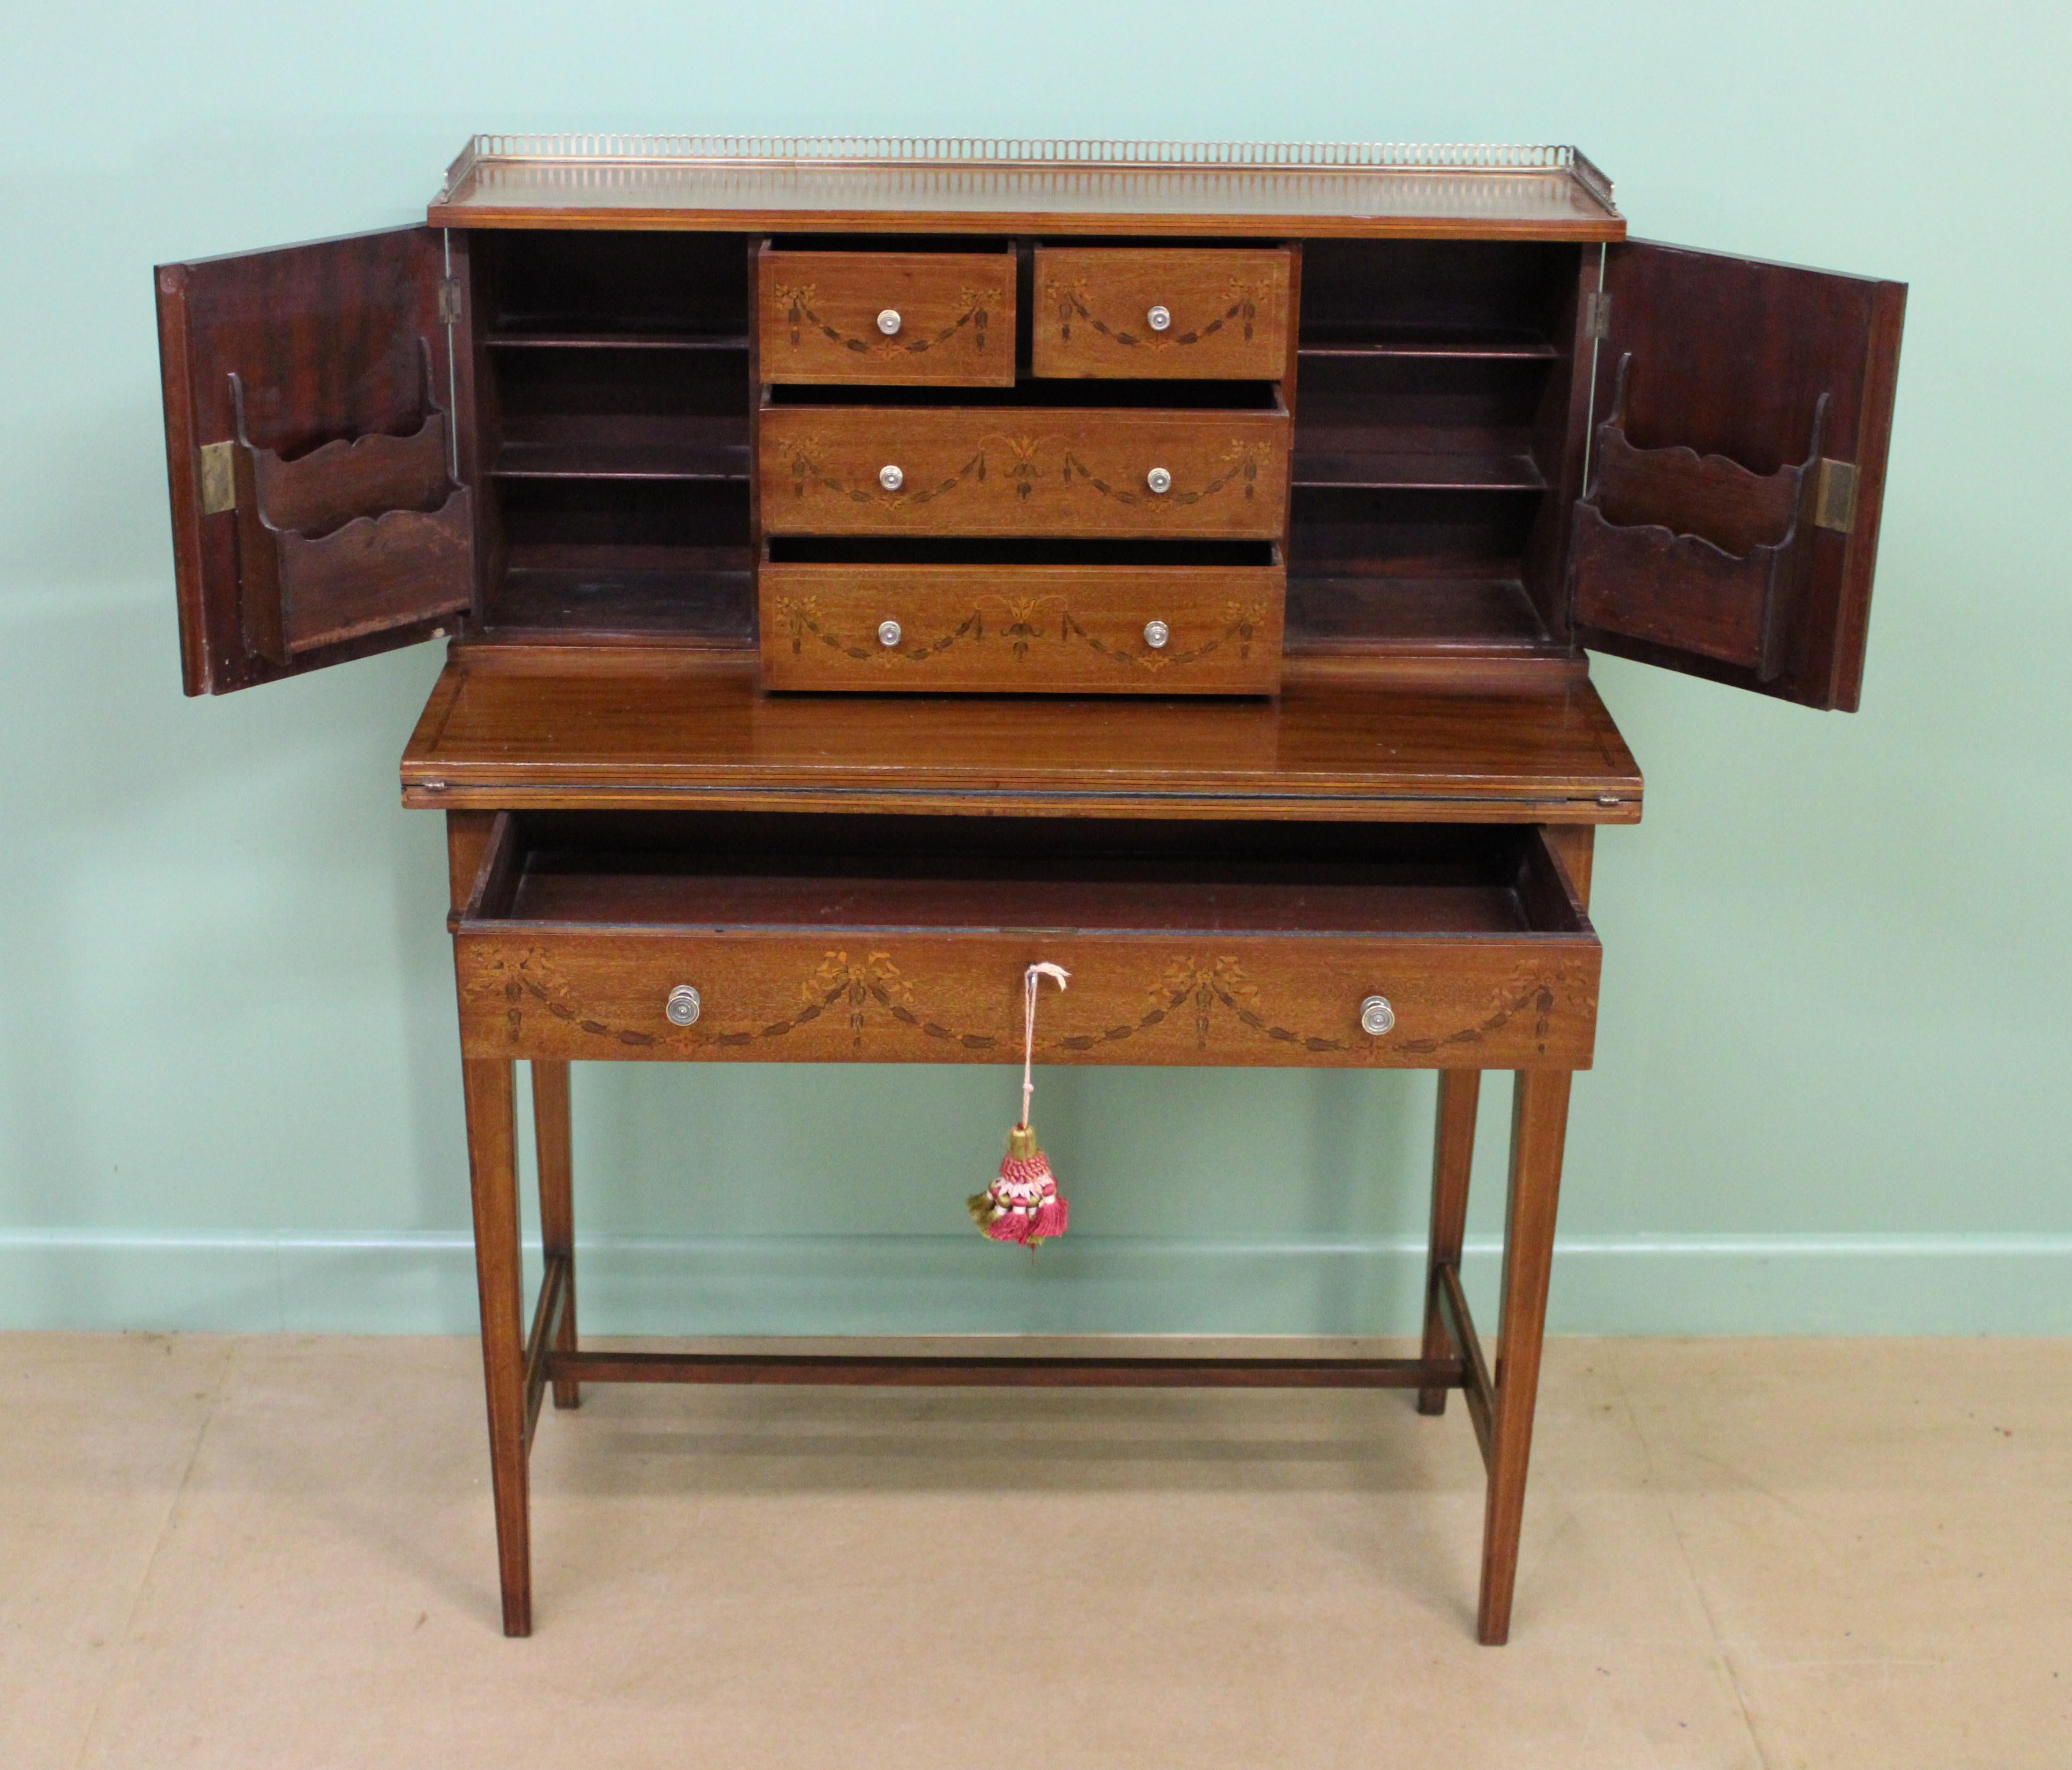 Late 19th Century Inlaid Mahogany Bonheur Du Jour by Jas Shoolbred & Co. For Sale 2